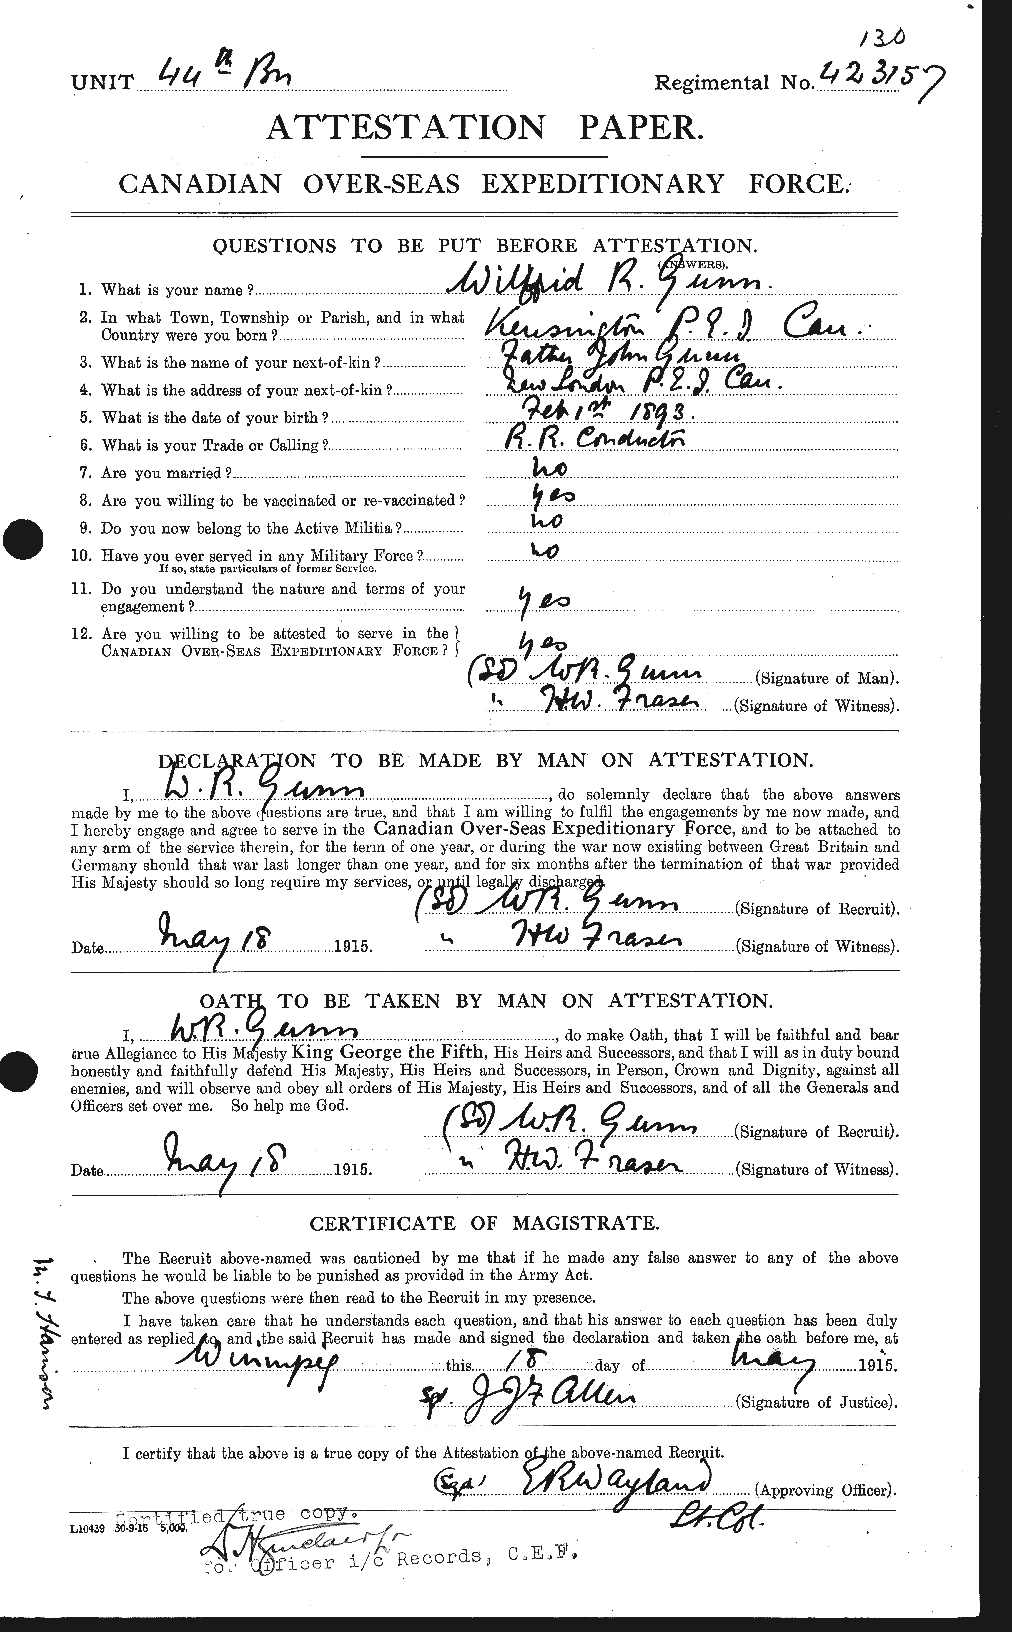 Personnel Records of the First World War - CEF 369348a